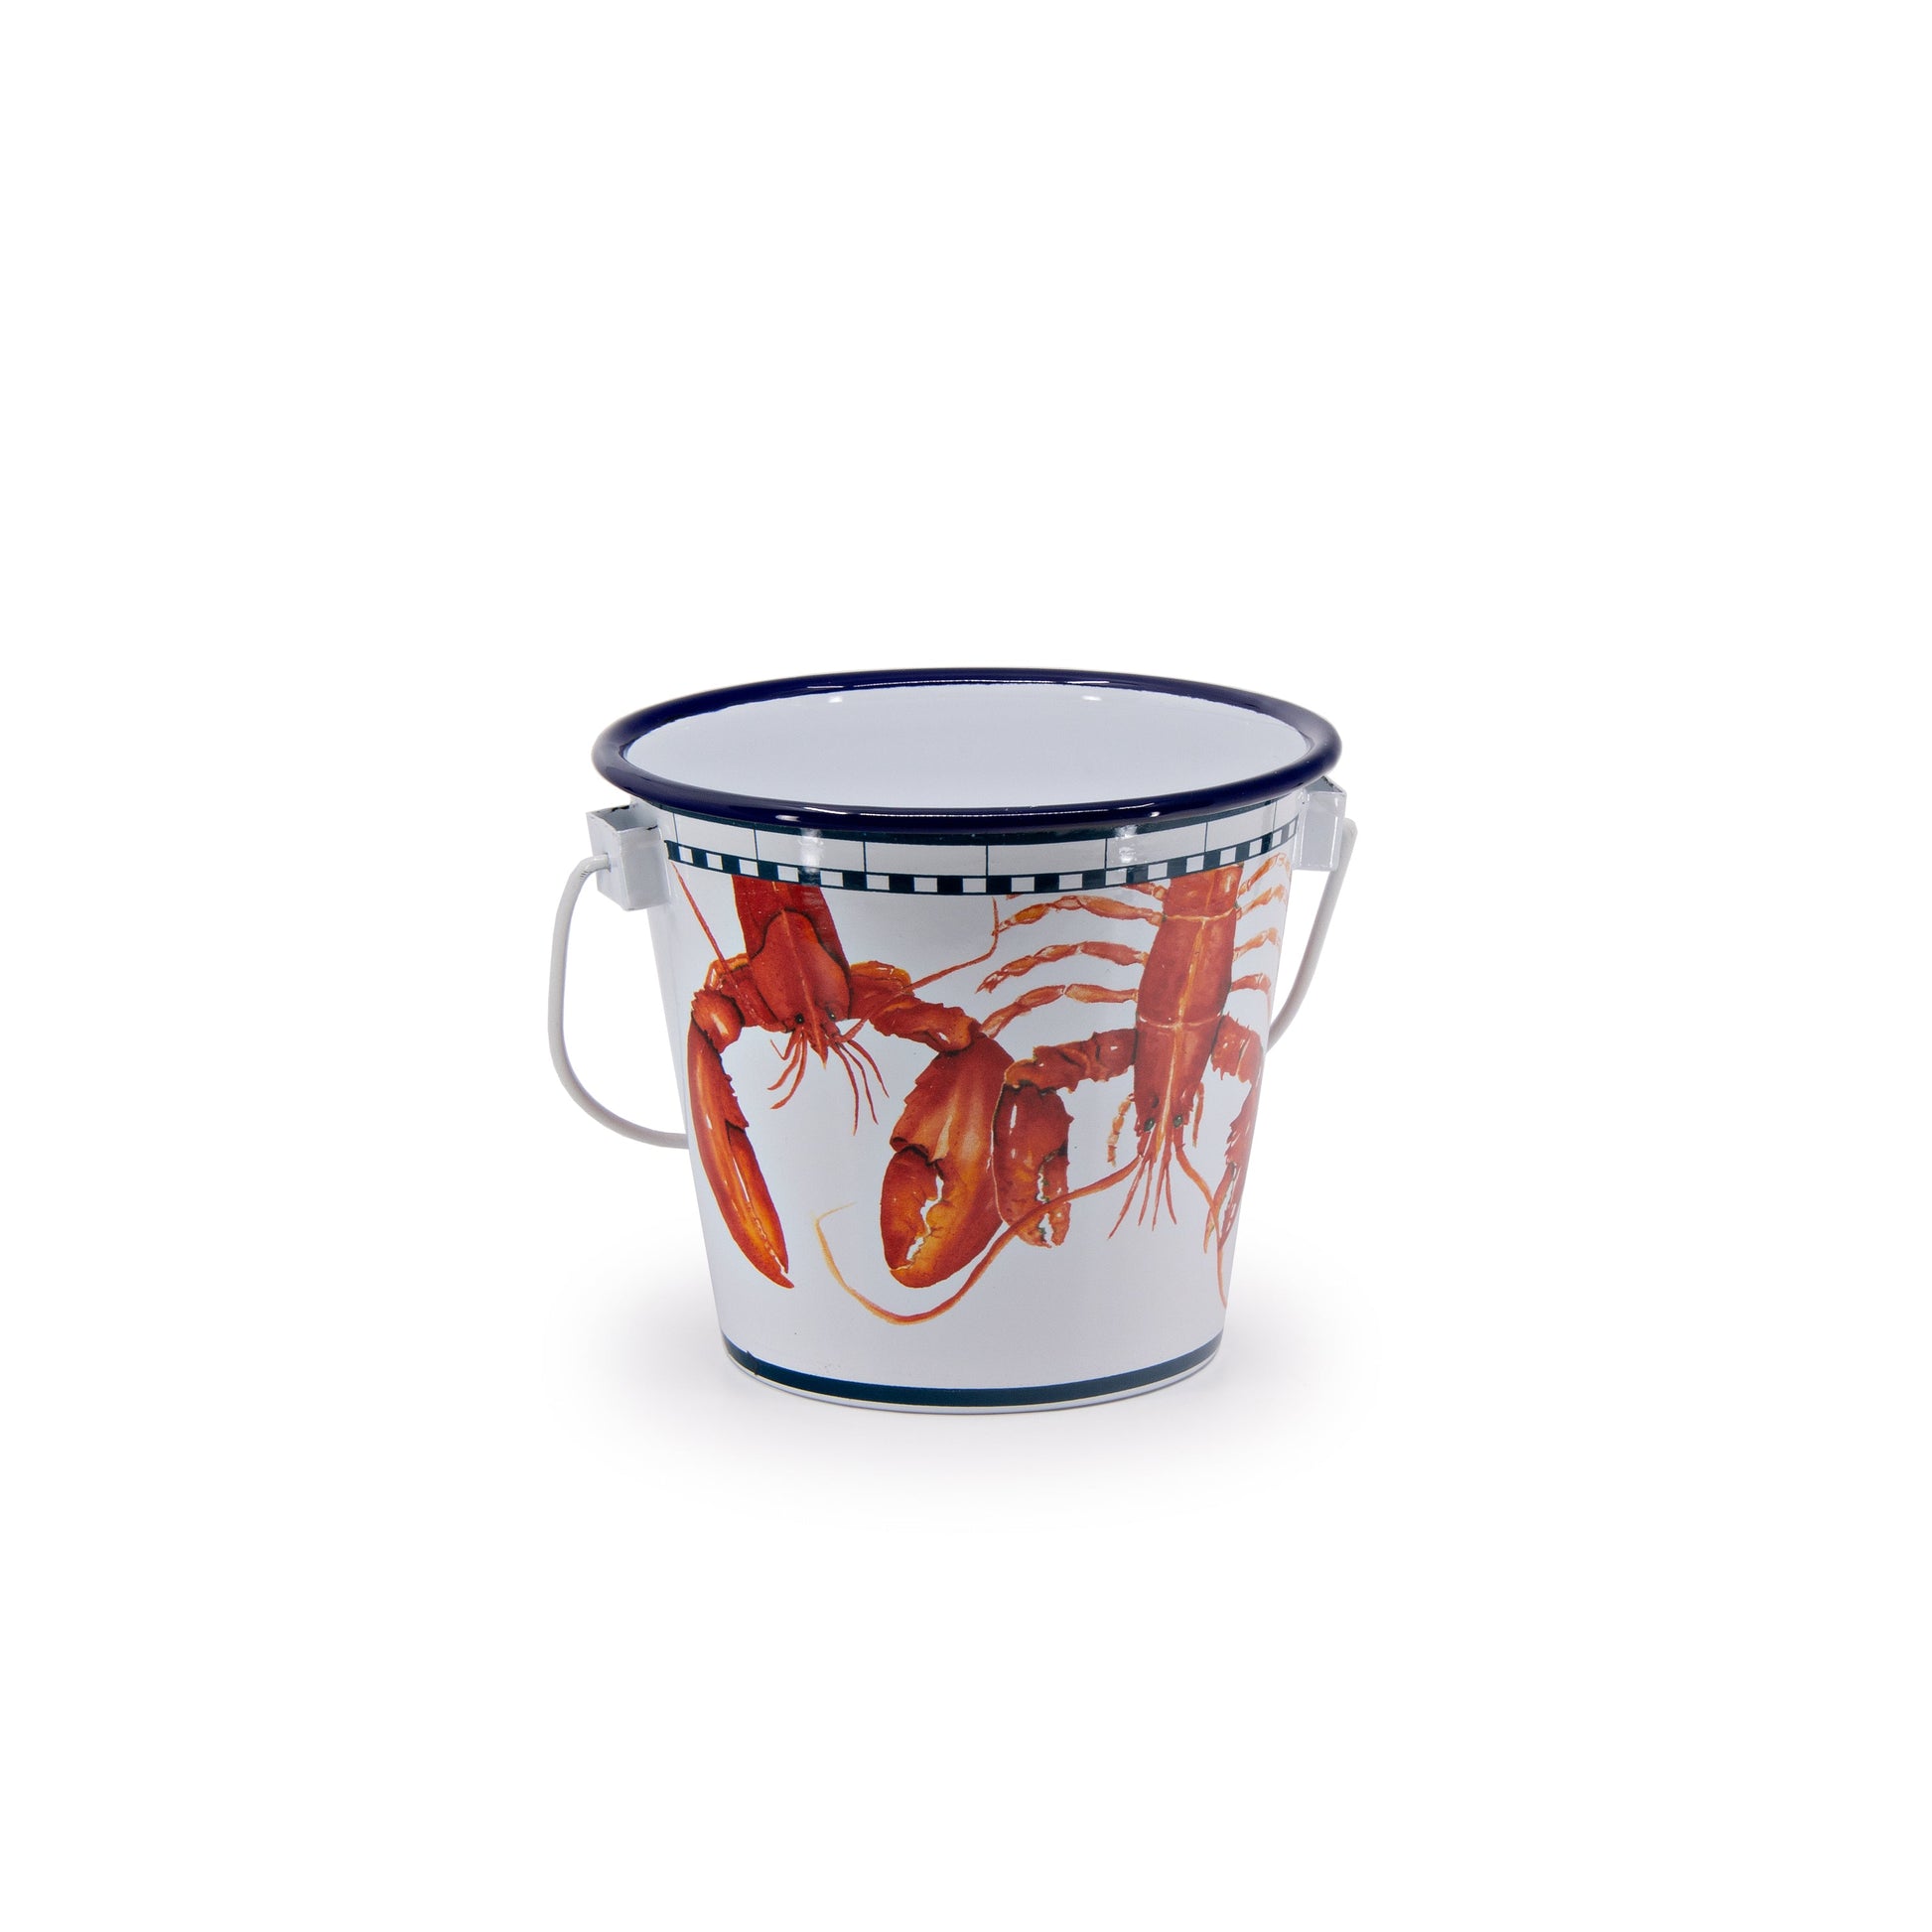 Lobster Pail-Serveware-Nautical Decor and Gifts